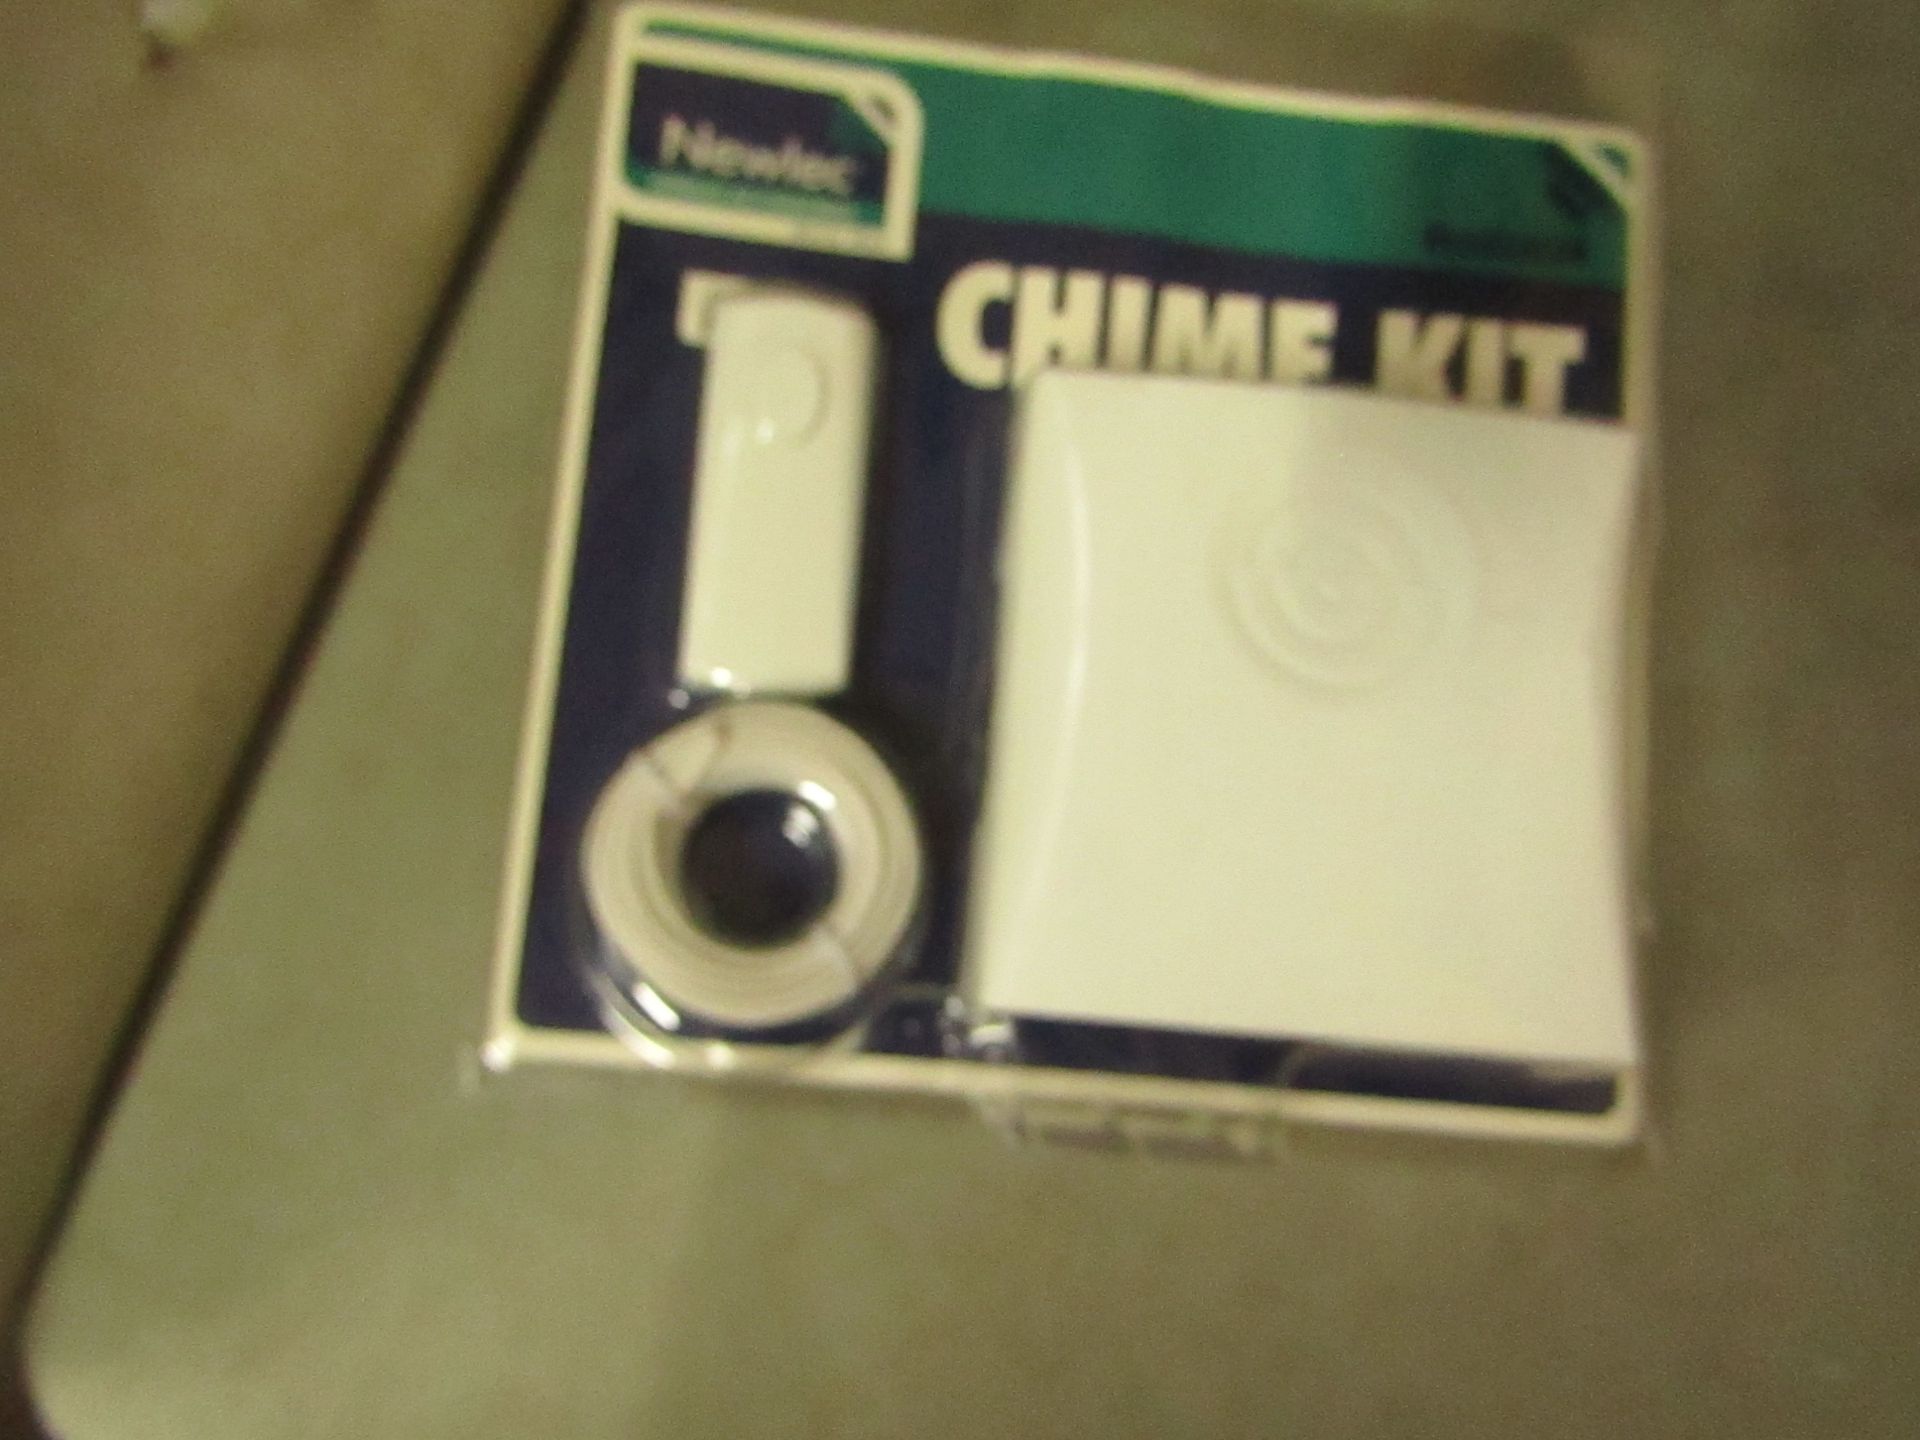 Newlec Chime kit. Unsued & packaged